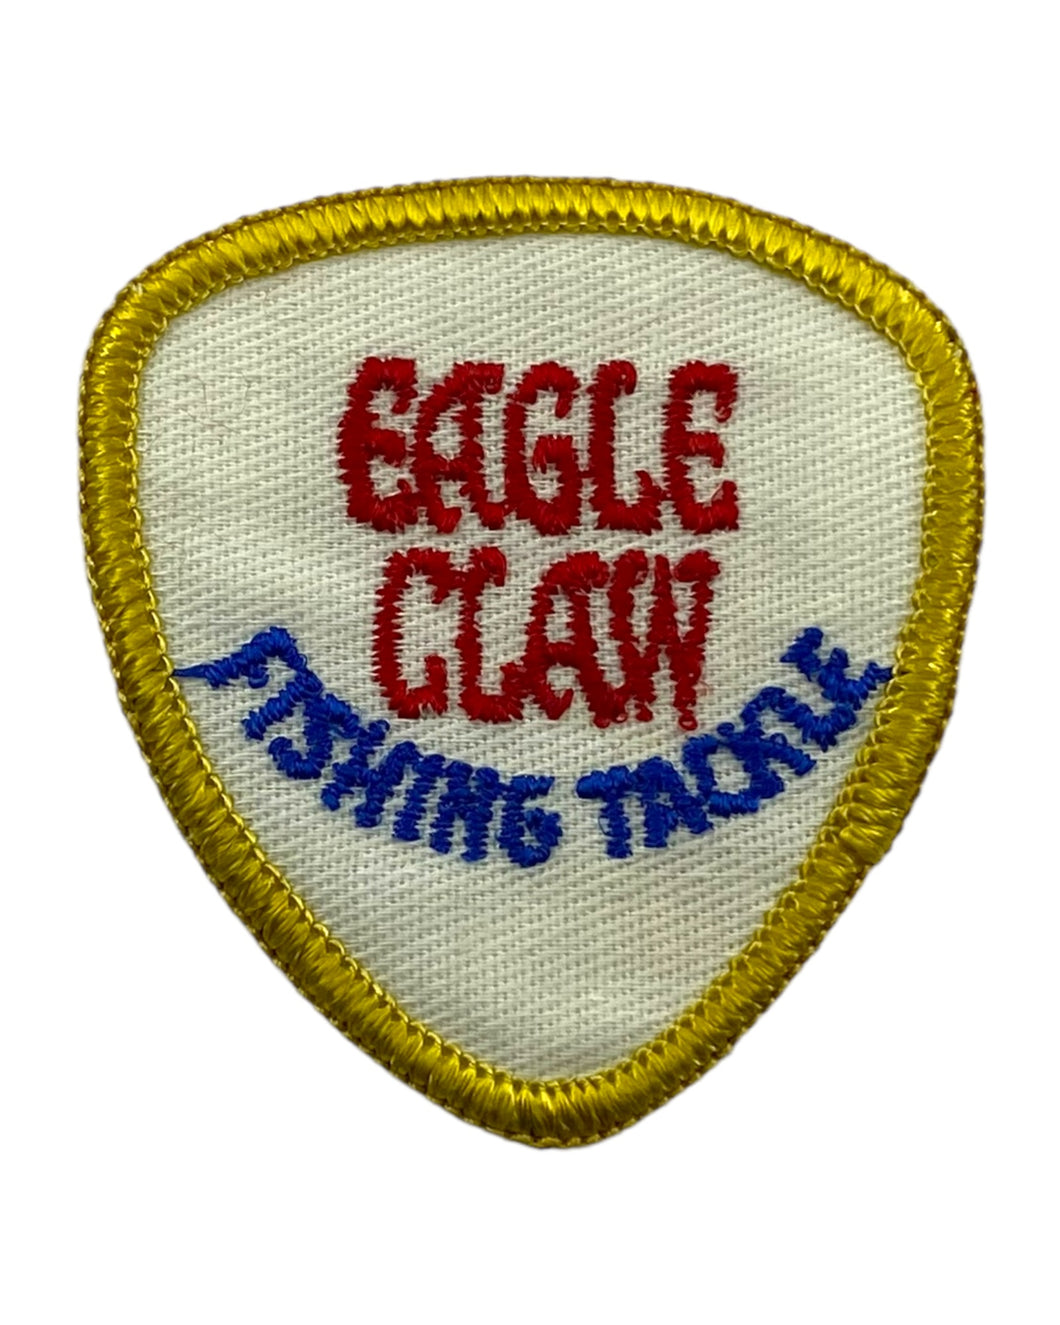 Cover Photo for Vintage EAGLE CLAW FISHING TACKLE COLLECTOR PATCH 